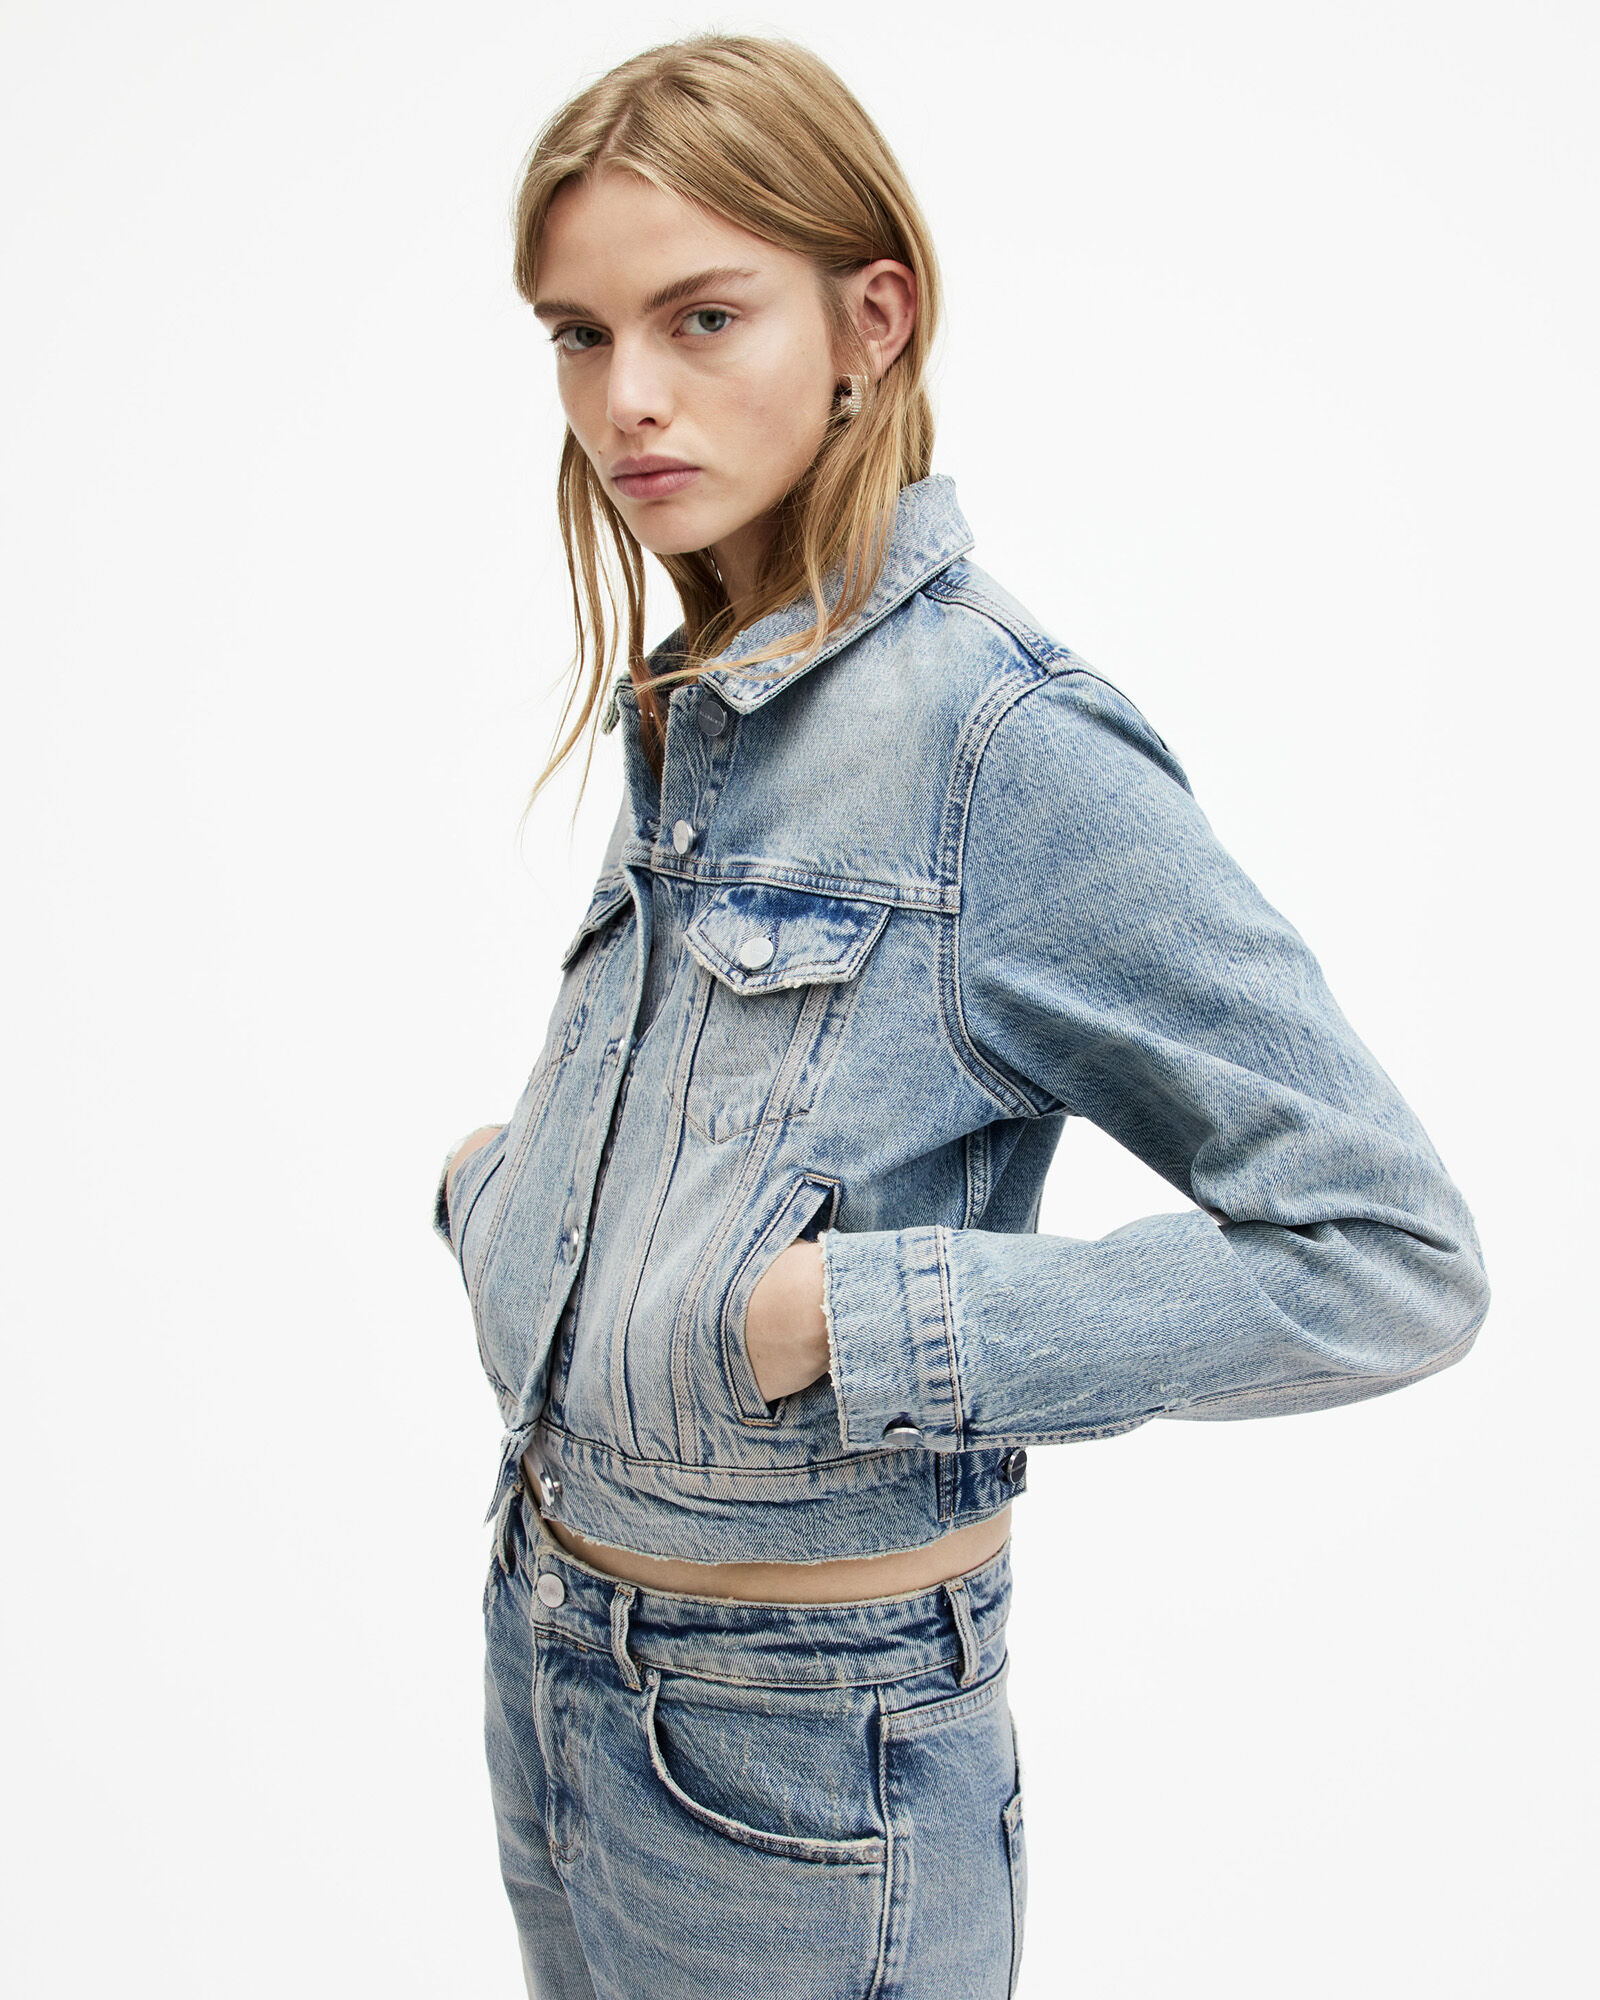 Jean Jackets: Not Just For The '90s | lovesthat